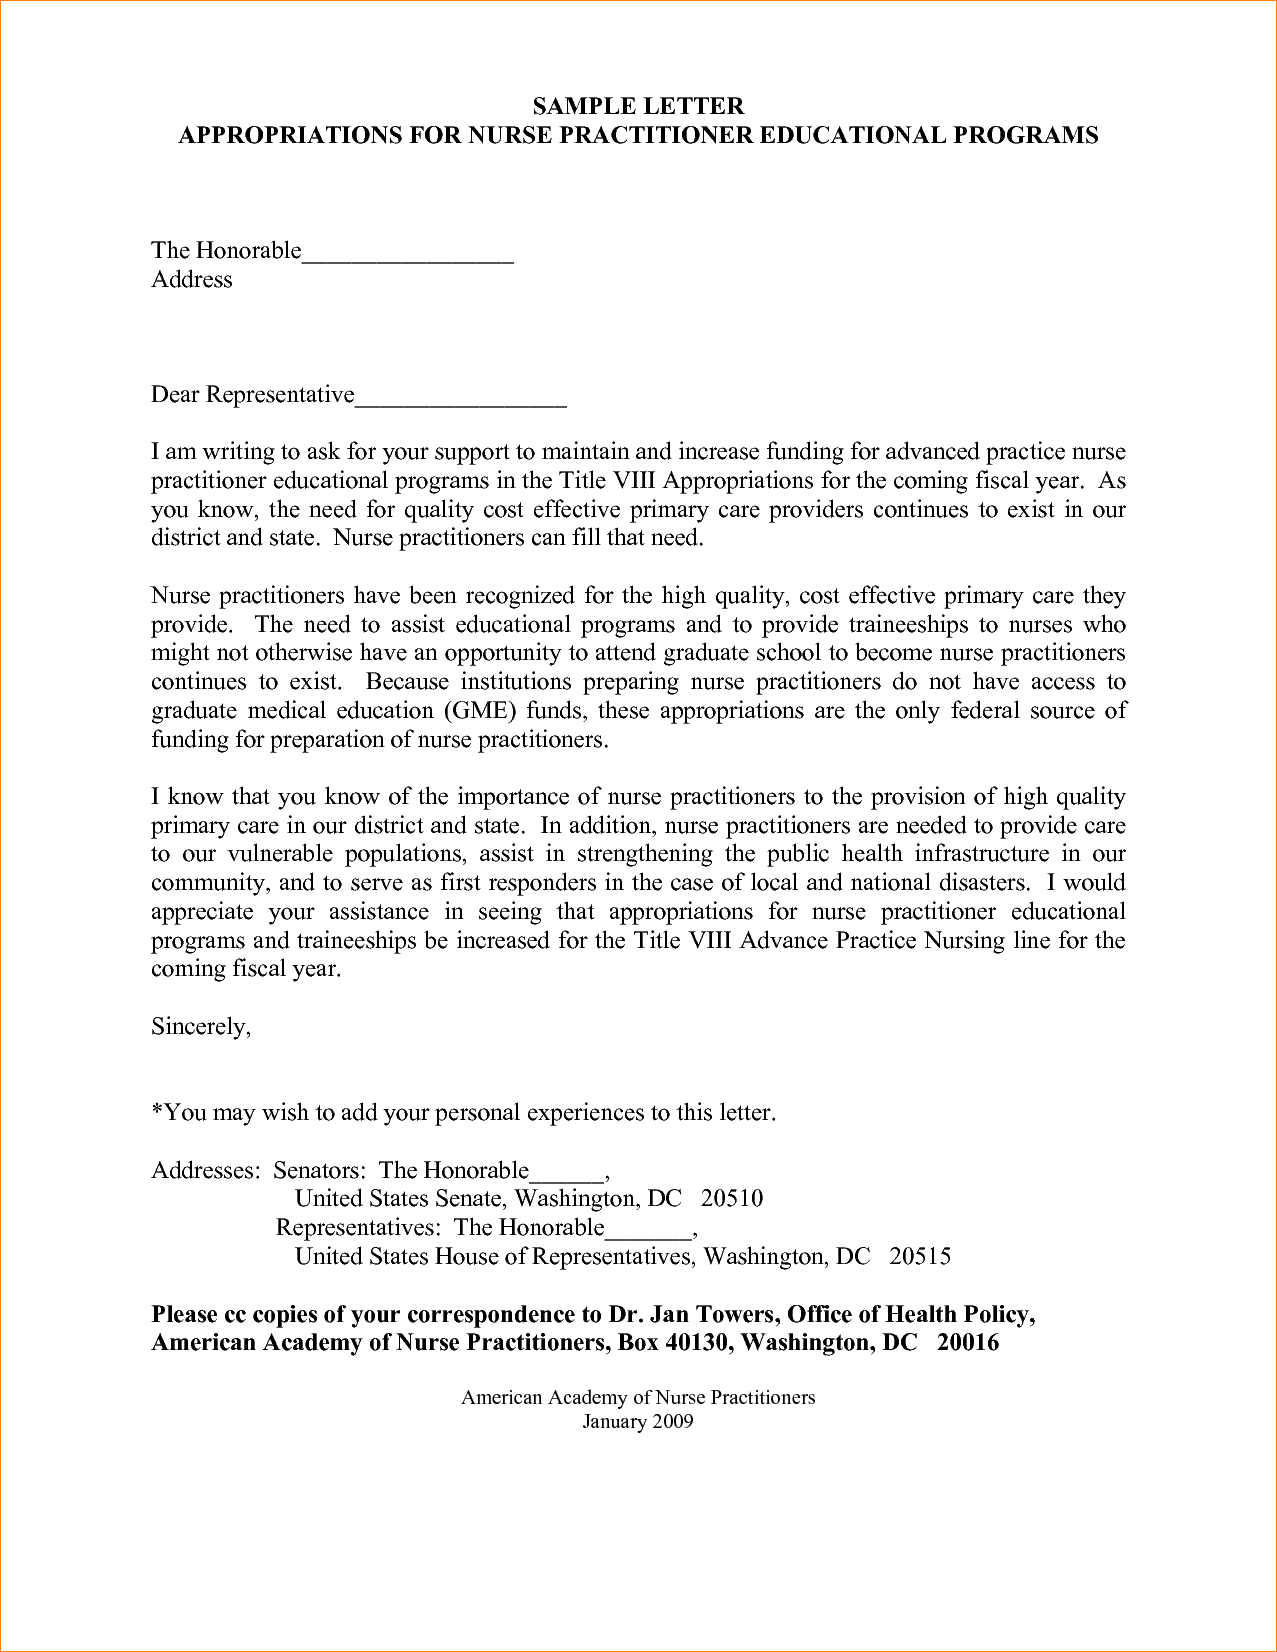 Medical School Letter Of Recommendation Template - Lovely Medical School Letter Re Mendation Template